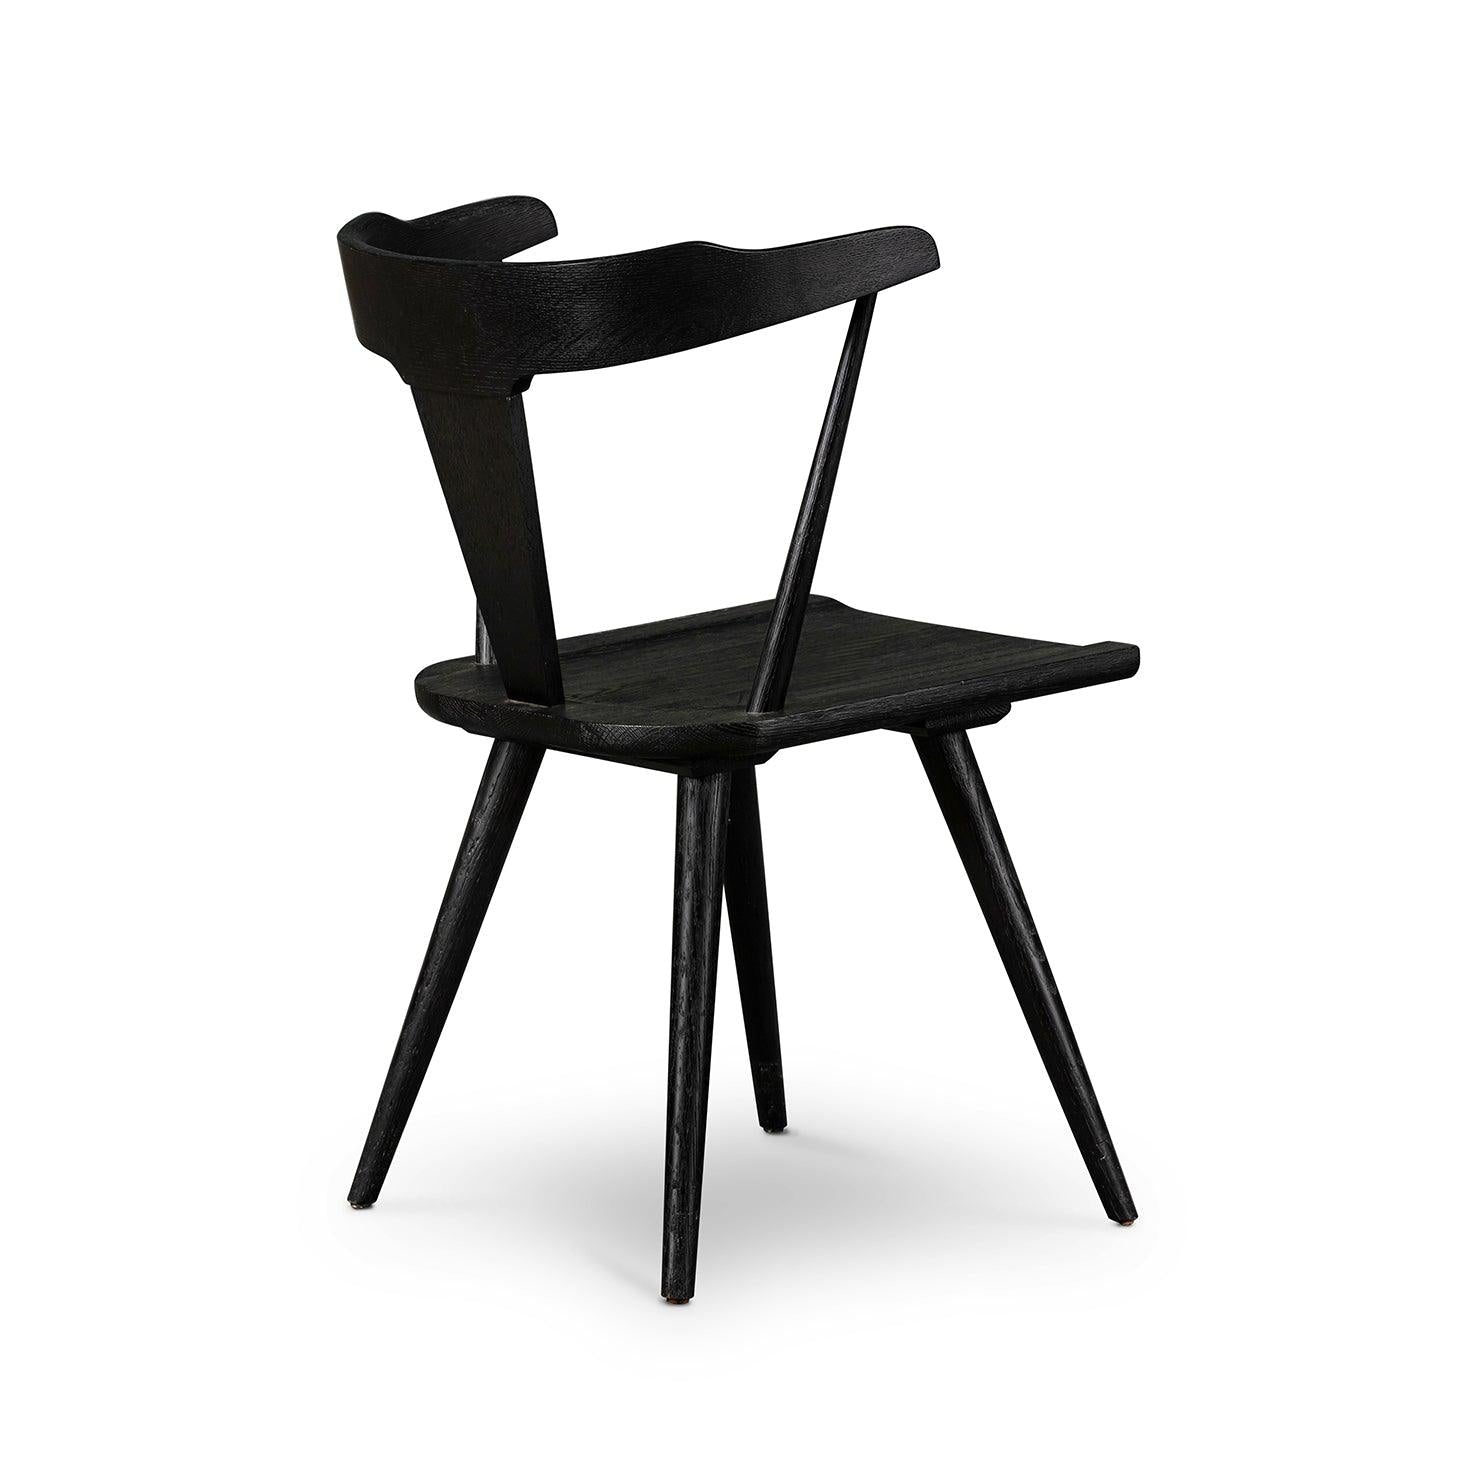 Ripley Dining Chair, Black - Reimagine Designs - Dining Chair